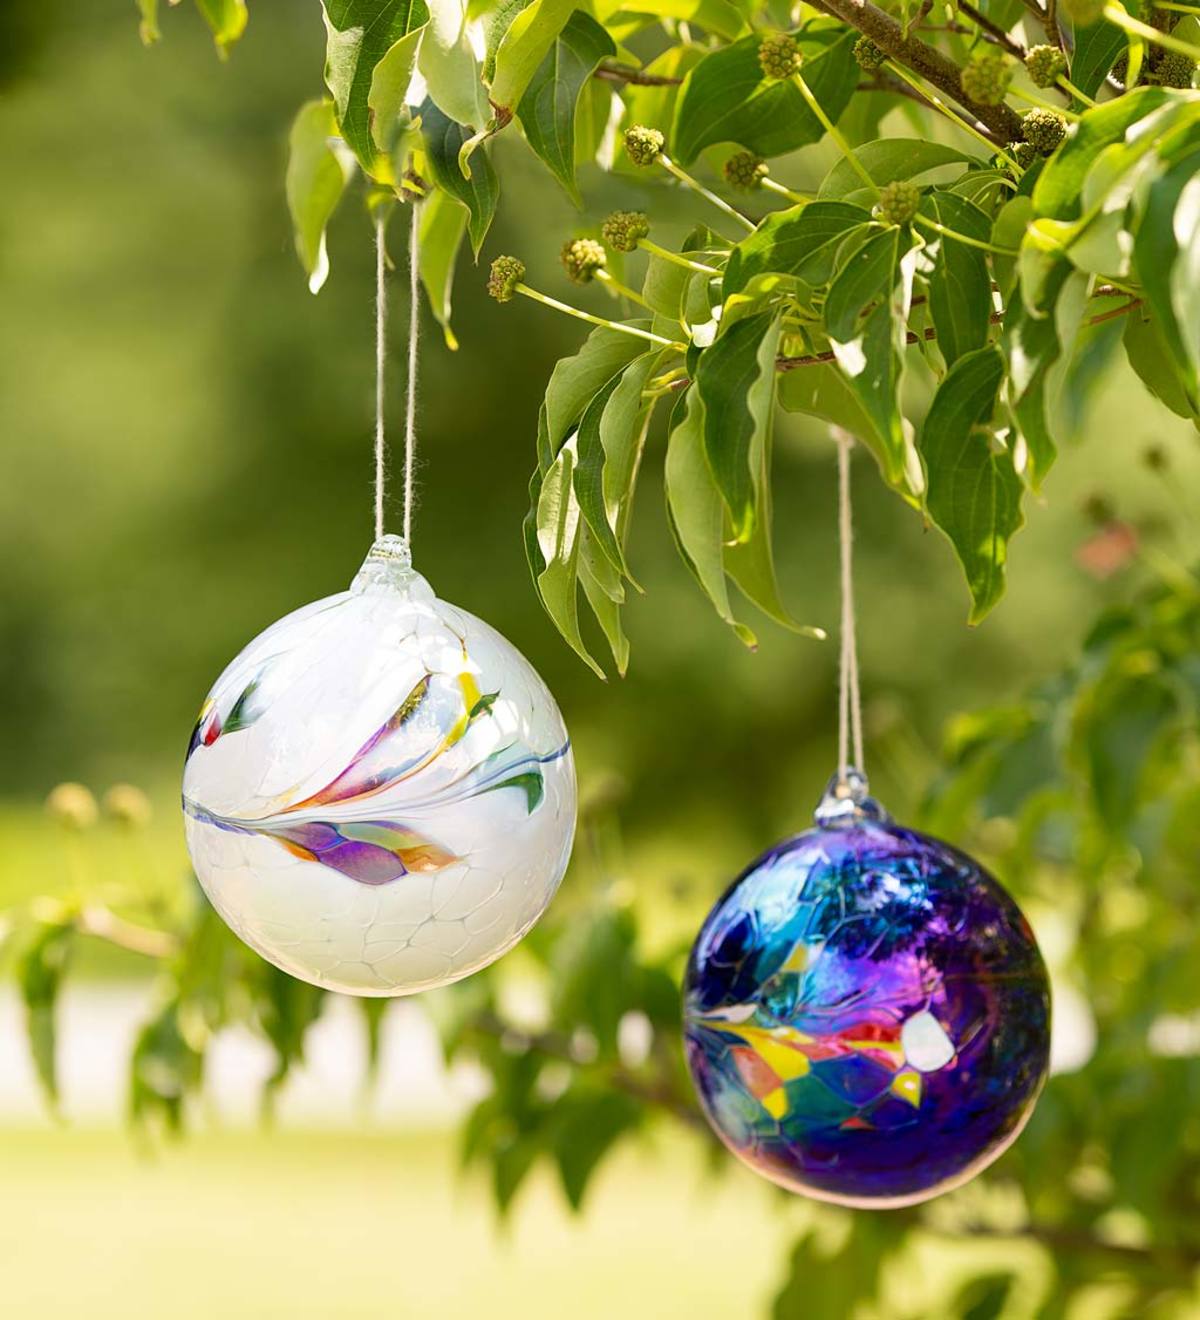 Individually Hand-Blown Glass Globe Holiday Ornament - Blue | Wind and ...